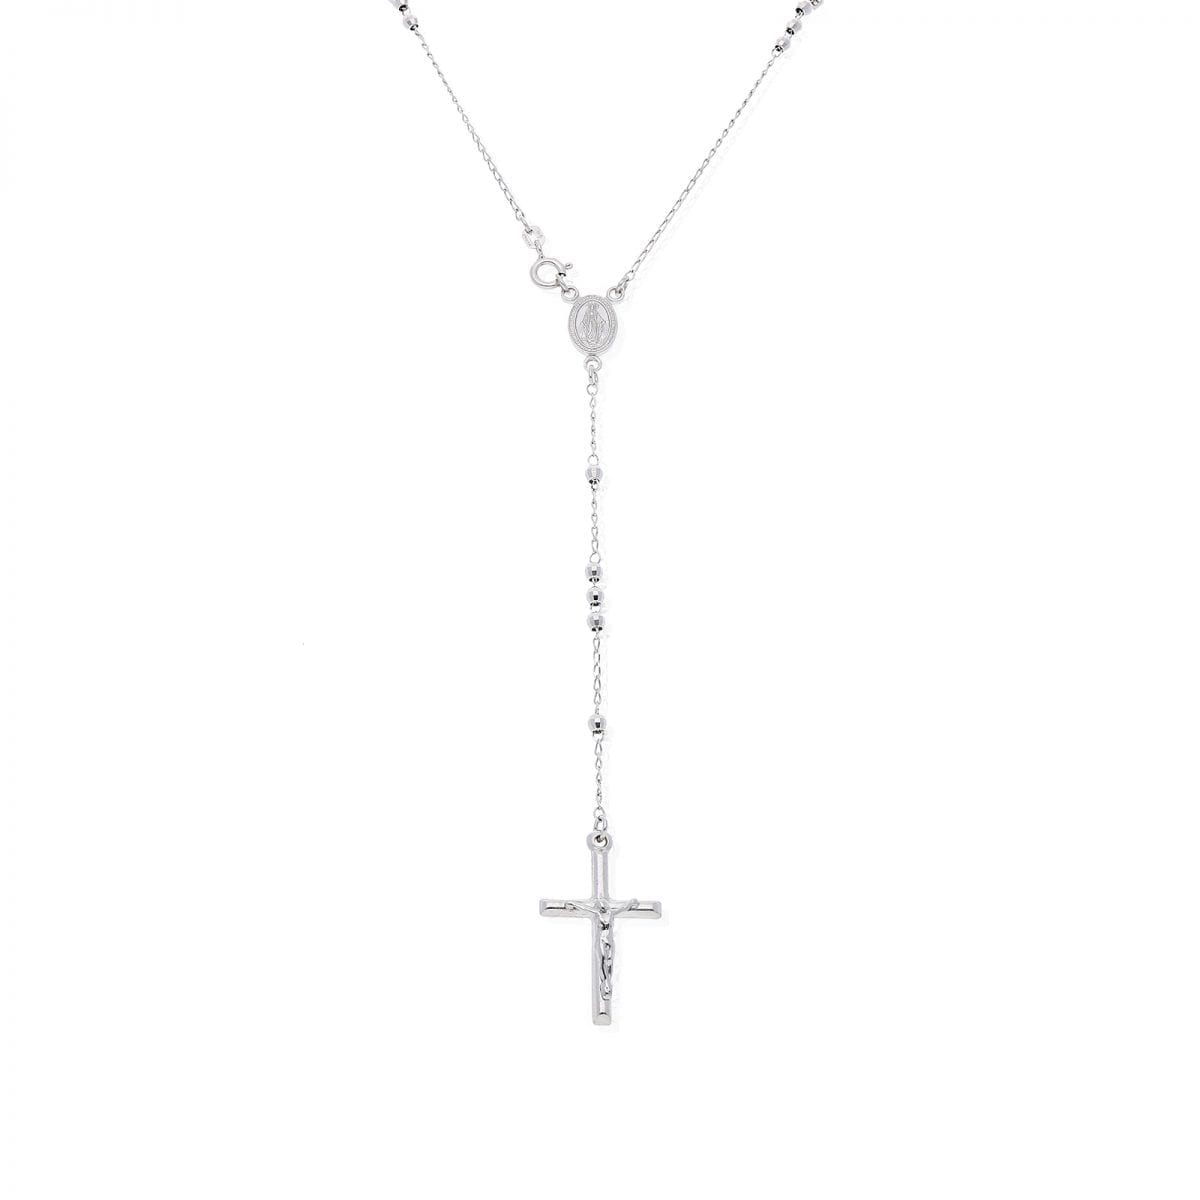 925 Sterling Silver 3mm Diamond Cut Rosary Cross Chain Necklace 18"